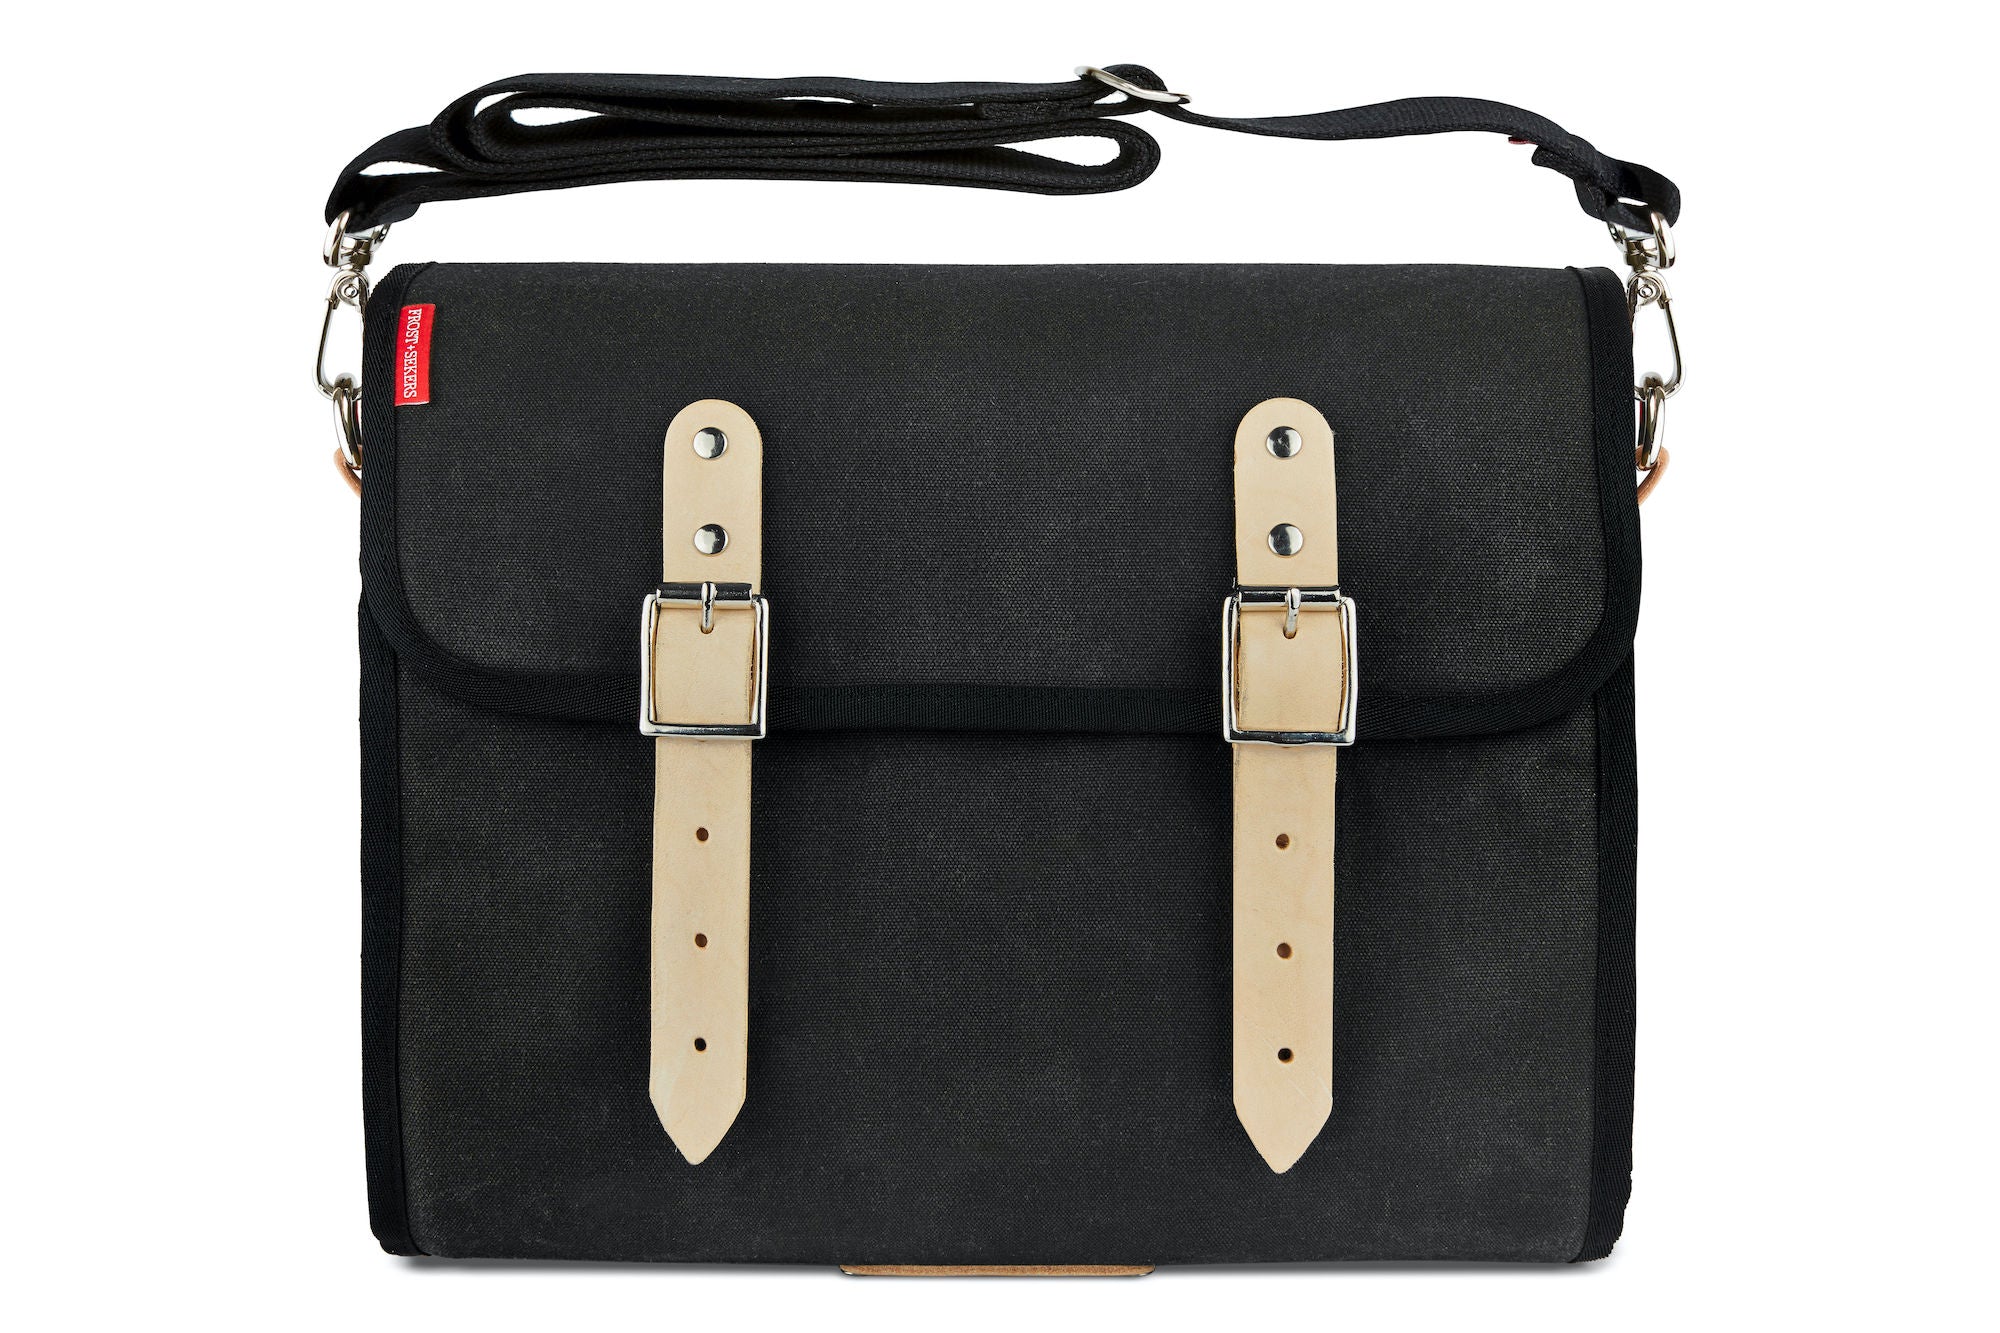 Frost and Sekers Marvin saddle bag. Black canvas with tan leather.